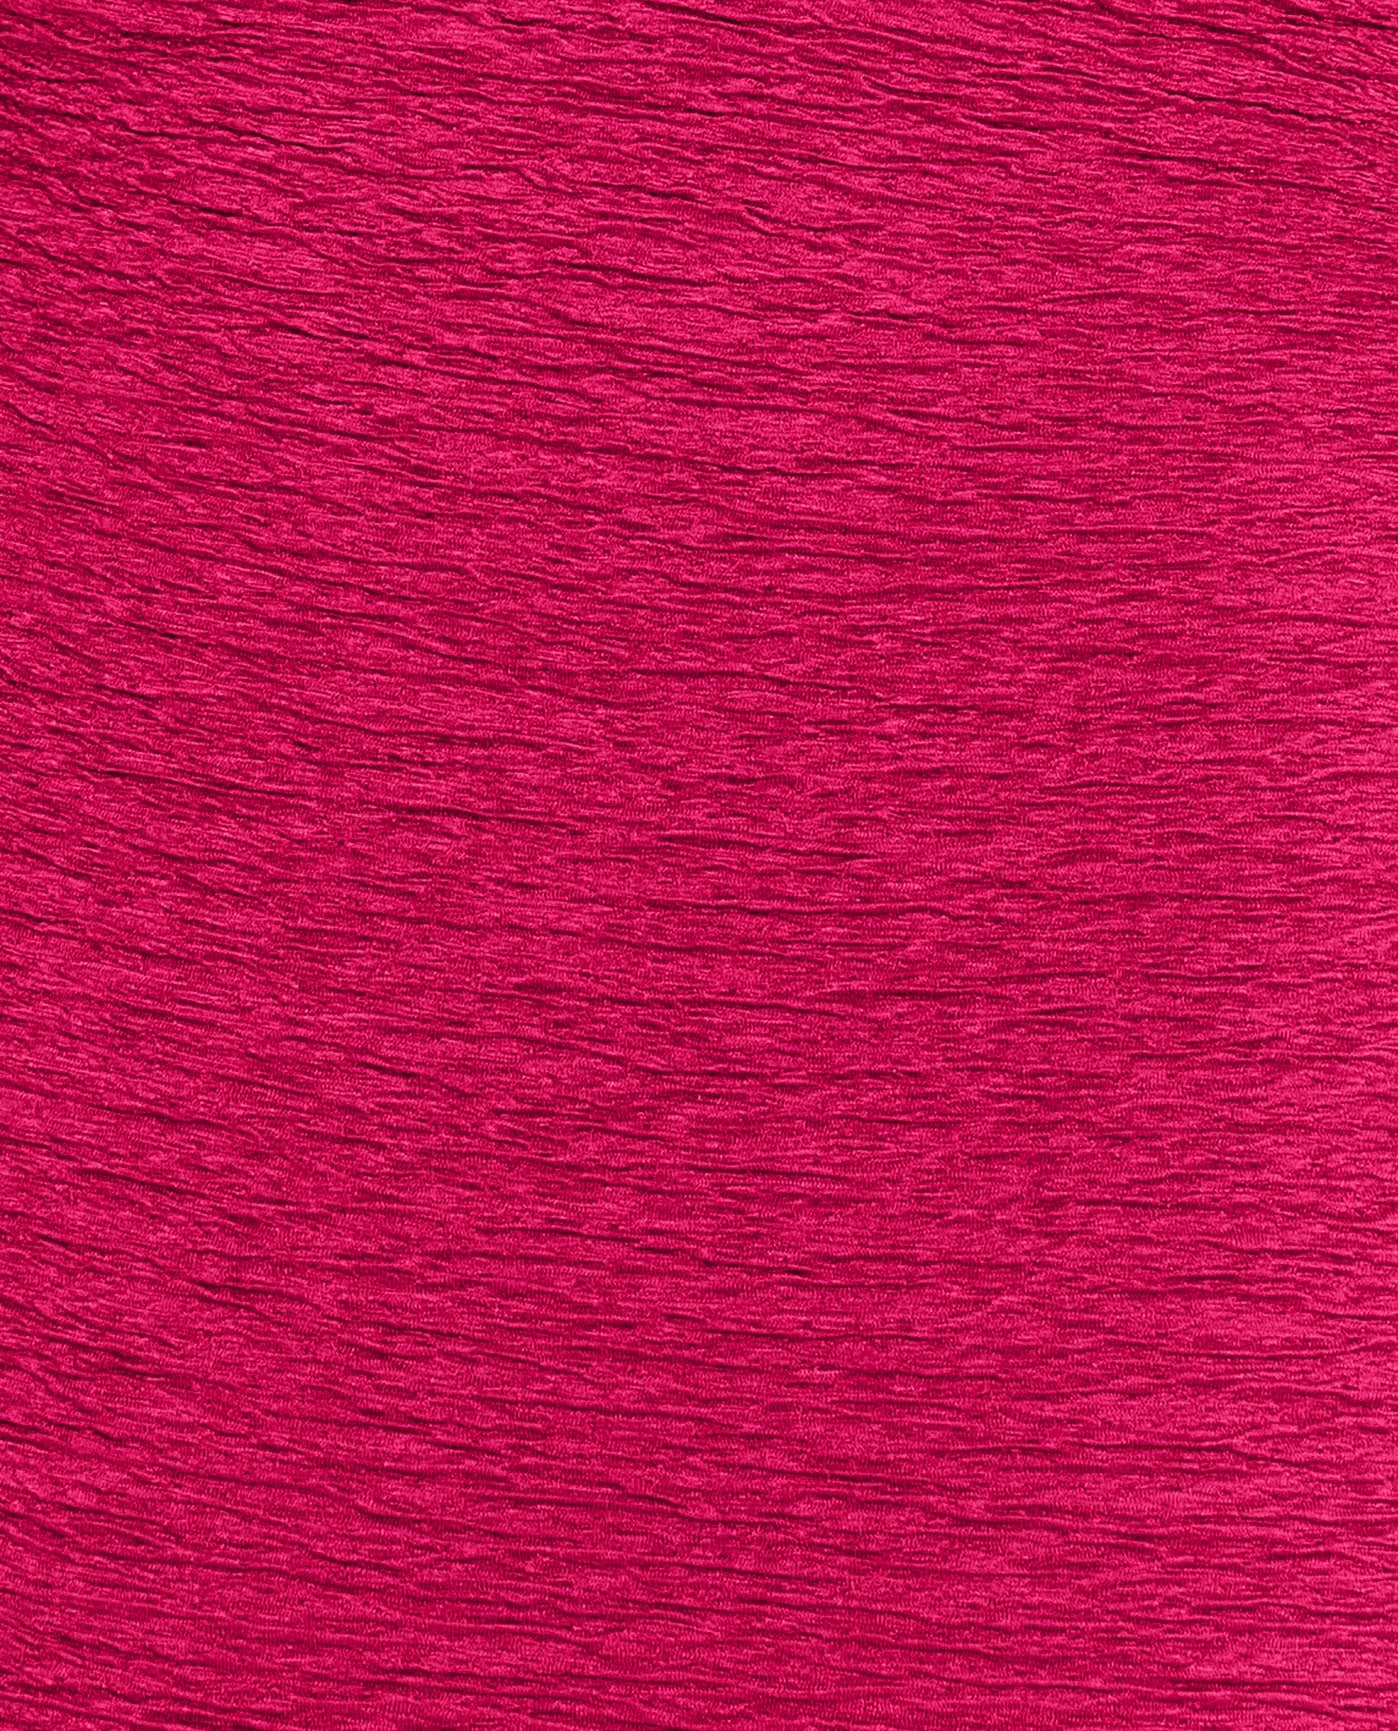 FABRIC SWATCH VIEW OF CHLORINE RESISTANT KRINKLE TEXTURED COLOR BLOCK TWIST FRONT ONE PIECE | KRINKLE ROSE